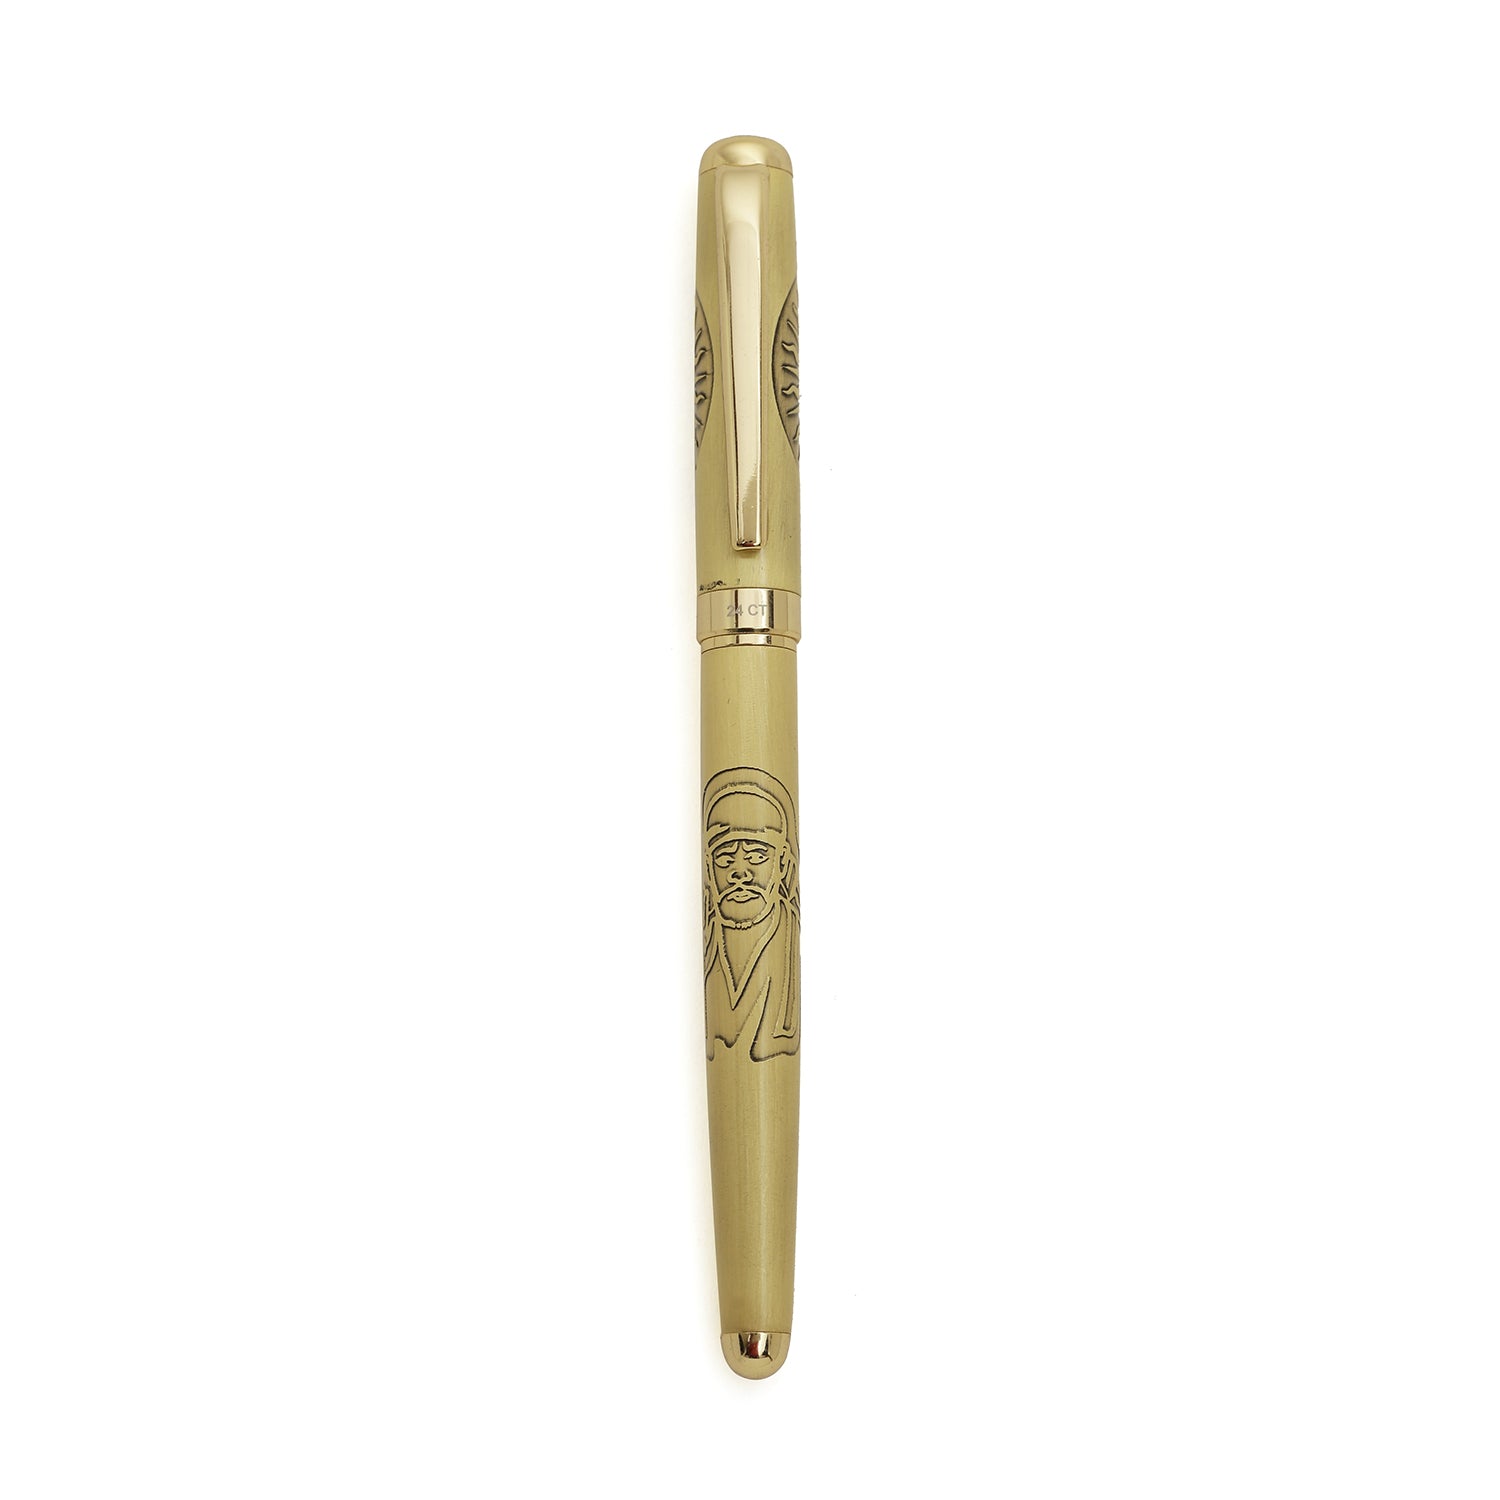 Hayman 24 CT Gold Plated Sia baba ji & om Engraved Roller Ball Pen with Box (P-130) - Hayman Pen 